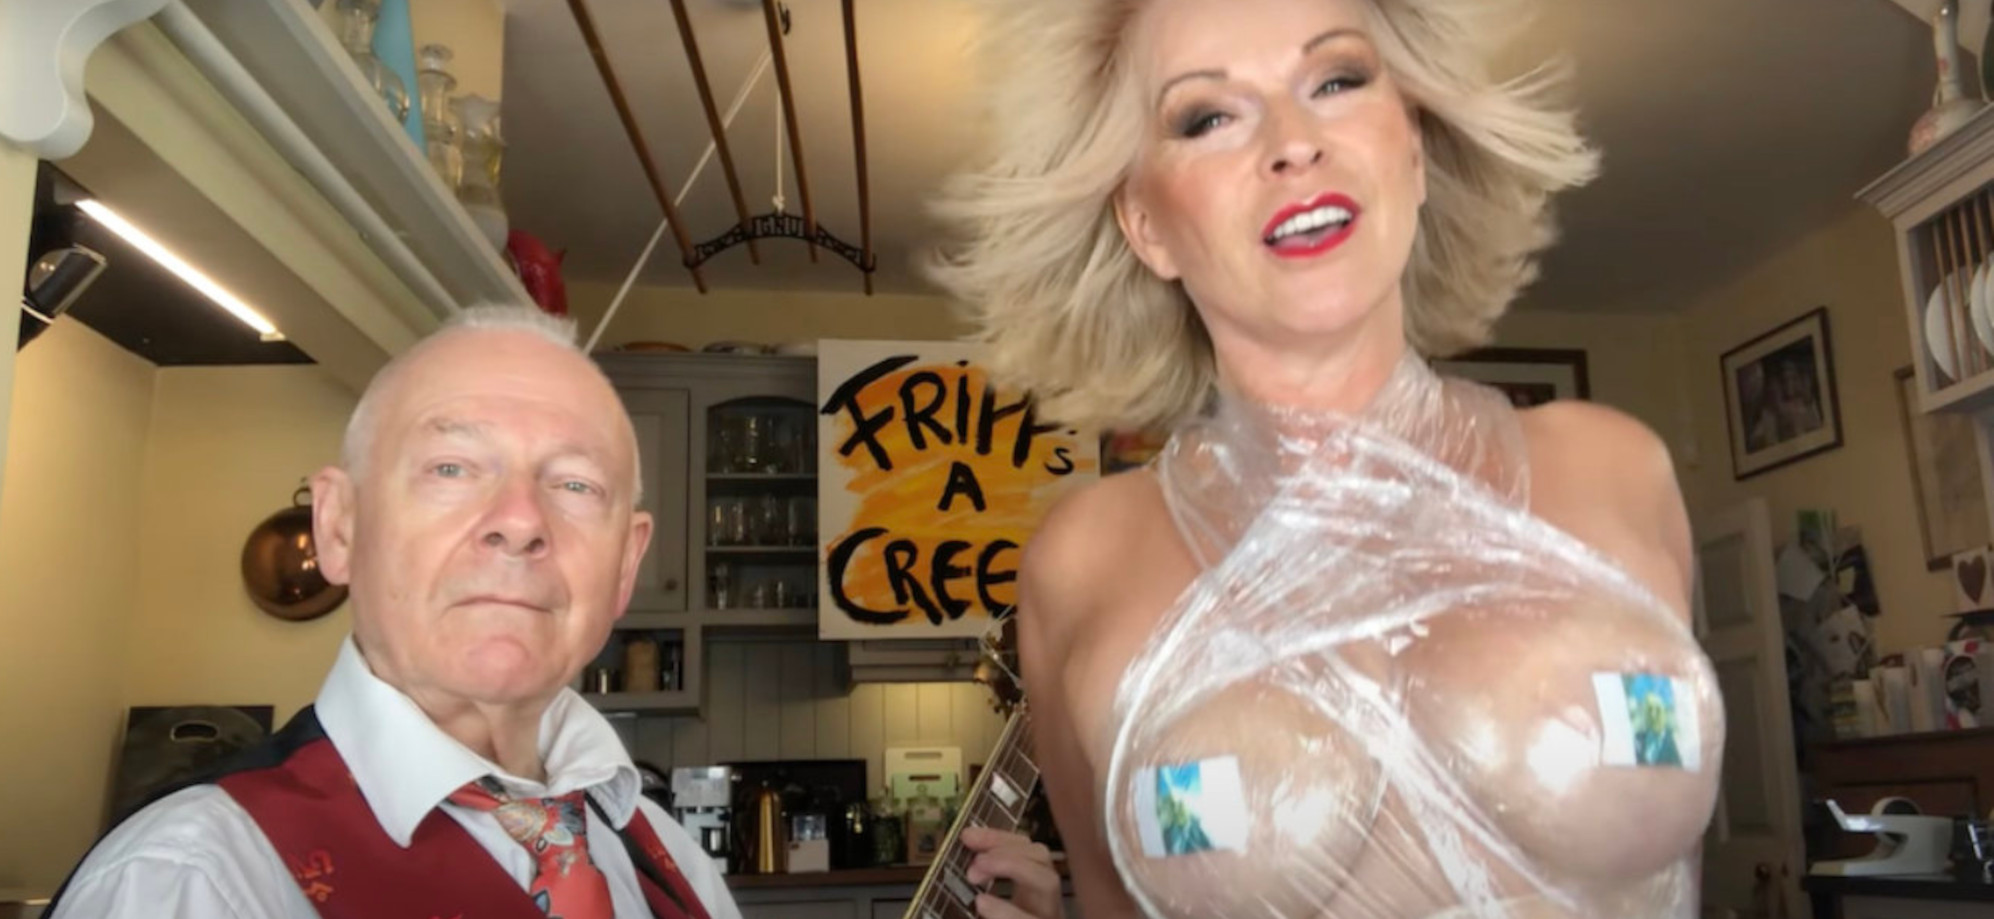 See Robert Fripp and Wife Toyah Wilcox Perform a Revealing Rendition of Radiohead’s “Creep”